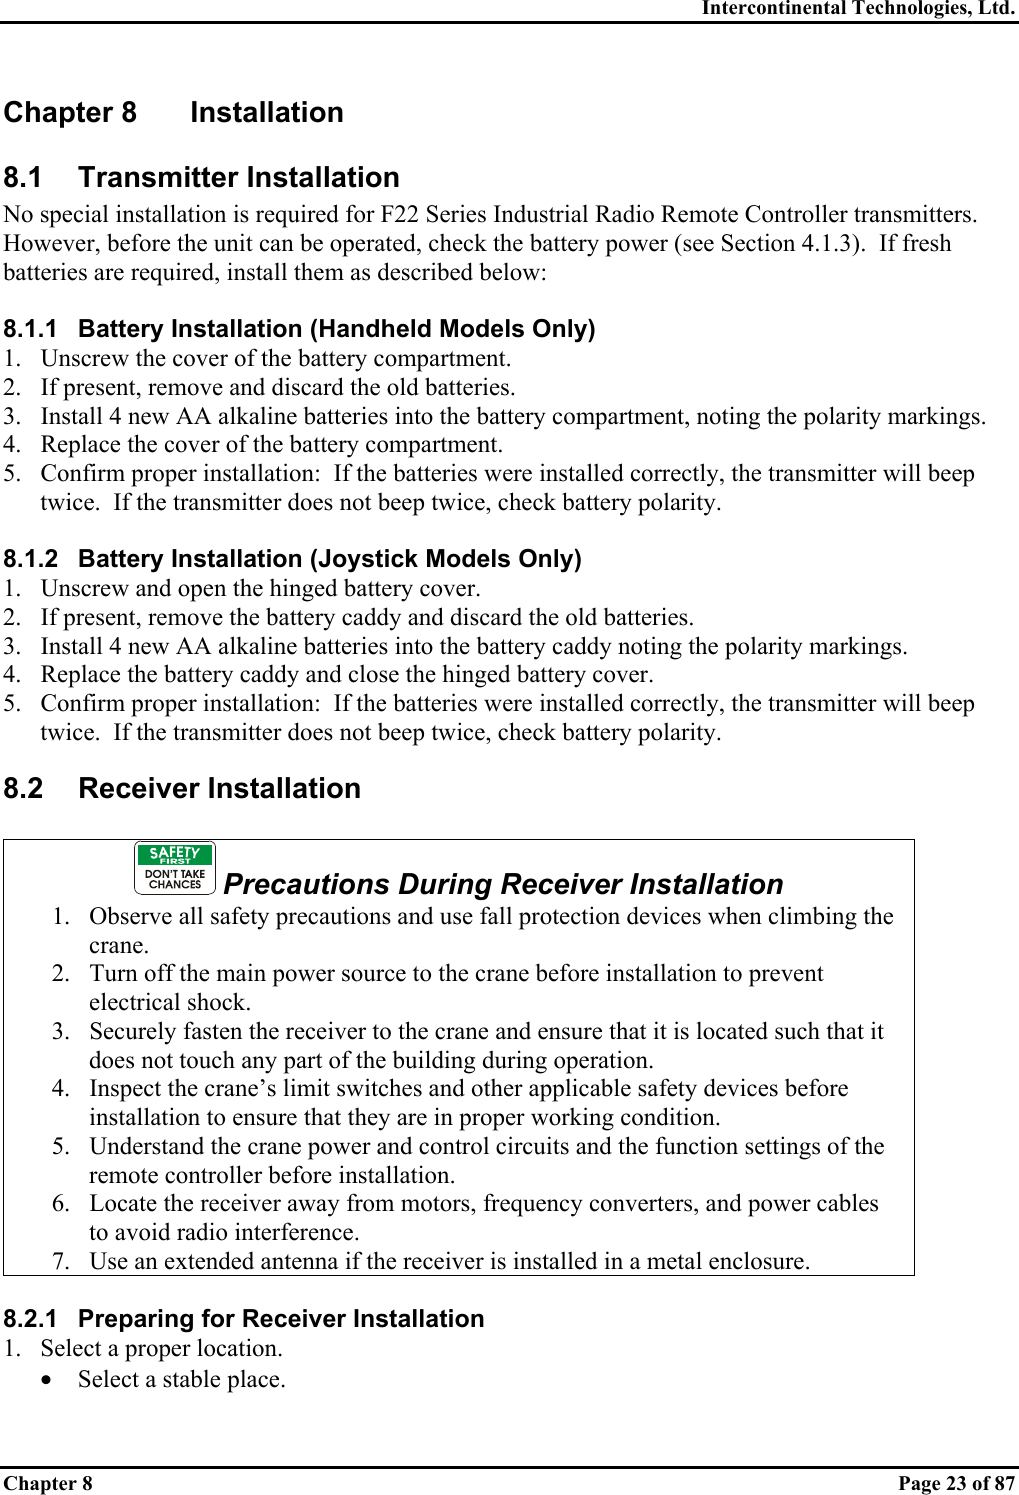 Intercontinental Technologies, Ltd. Chapter 8    Page 23 of 87 Chapter 8  Installation 8.1 Transmitter Installation No special installation is required for F22 Series Industrial Radio Remote Controller transmitters.  However, before the unit can be operated, check the battery power (see Section 4.1.3).  If fresh batteries are required, install them as described below:  8.1.1  Battery Installation (Handheld Models Only) 1.  Unscrew the cover of the battery compartment. 2.  If present, remove and discard the old batteries. 3.  Install 4 new AA alkaline batteries into the battery compartment, noting the polarity markings. 4.  Replace the cover of the battery compartment. 5.  Confirm proper installation:  If the batteries were installed correctly, the transmitter will beep twice.  If the transmitter does not beep twice, check battery polarity.  8.1.2  Battery Installation (Joystick Models Only) 1.  Unscrew and open the hinged battery cover. 2.  If present, remove the battery caddy and discard the old batteries. 3.  Install 4 new AA alkaline batteries into the battery caddy noting the polarity markings. 4.  Replace the battery caddy and close the hinged battery cover. 5.  Confirm proper installation:  If the batteries were installed correctly, the transmitter will beep twice.  If the transmitter does not beep twice, check battery polarity. 8.2 Receiver Installation   Precautions During Receiver Installation 1.  Observe all safety precautions and use fall protection devices when climbing the crane. 2.  Turn off the main power source to the crane before installation to prevent electrical shock. 3.  Securely fasten the receiver to the crane and ensure that it is located such that it does not touch any part of the building during operation. 4.  Inspect the crane’s limit switches and other applicable safety devices before installation to ensure that they are in proper working condition. 5.  Understand the crane power and control circuits and the function settings of the remote controller before installation. 6.  Locate the receiver away from motors, frequency converters, and power cables to avoid radio interference. 7.  Use an extended antenna if the receiver is installed in a metal enclosure.   8.2.1  Preparing for Receiver Installation 1.  Select a proper location. •  Select a stable place. 